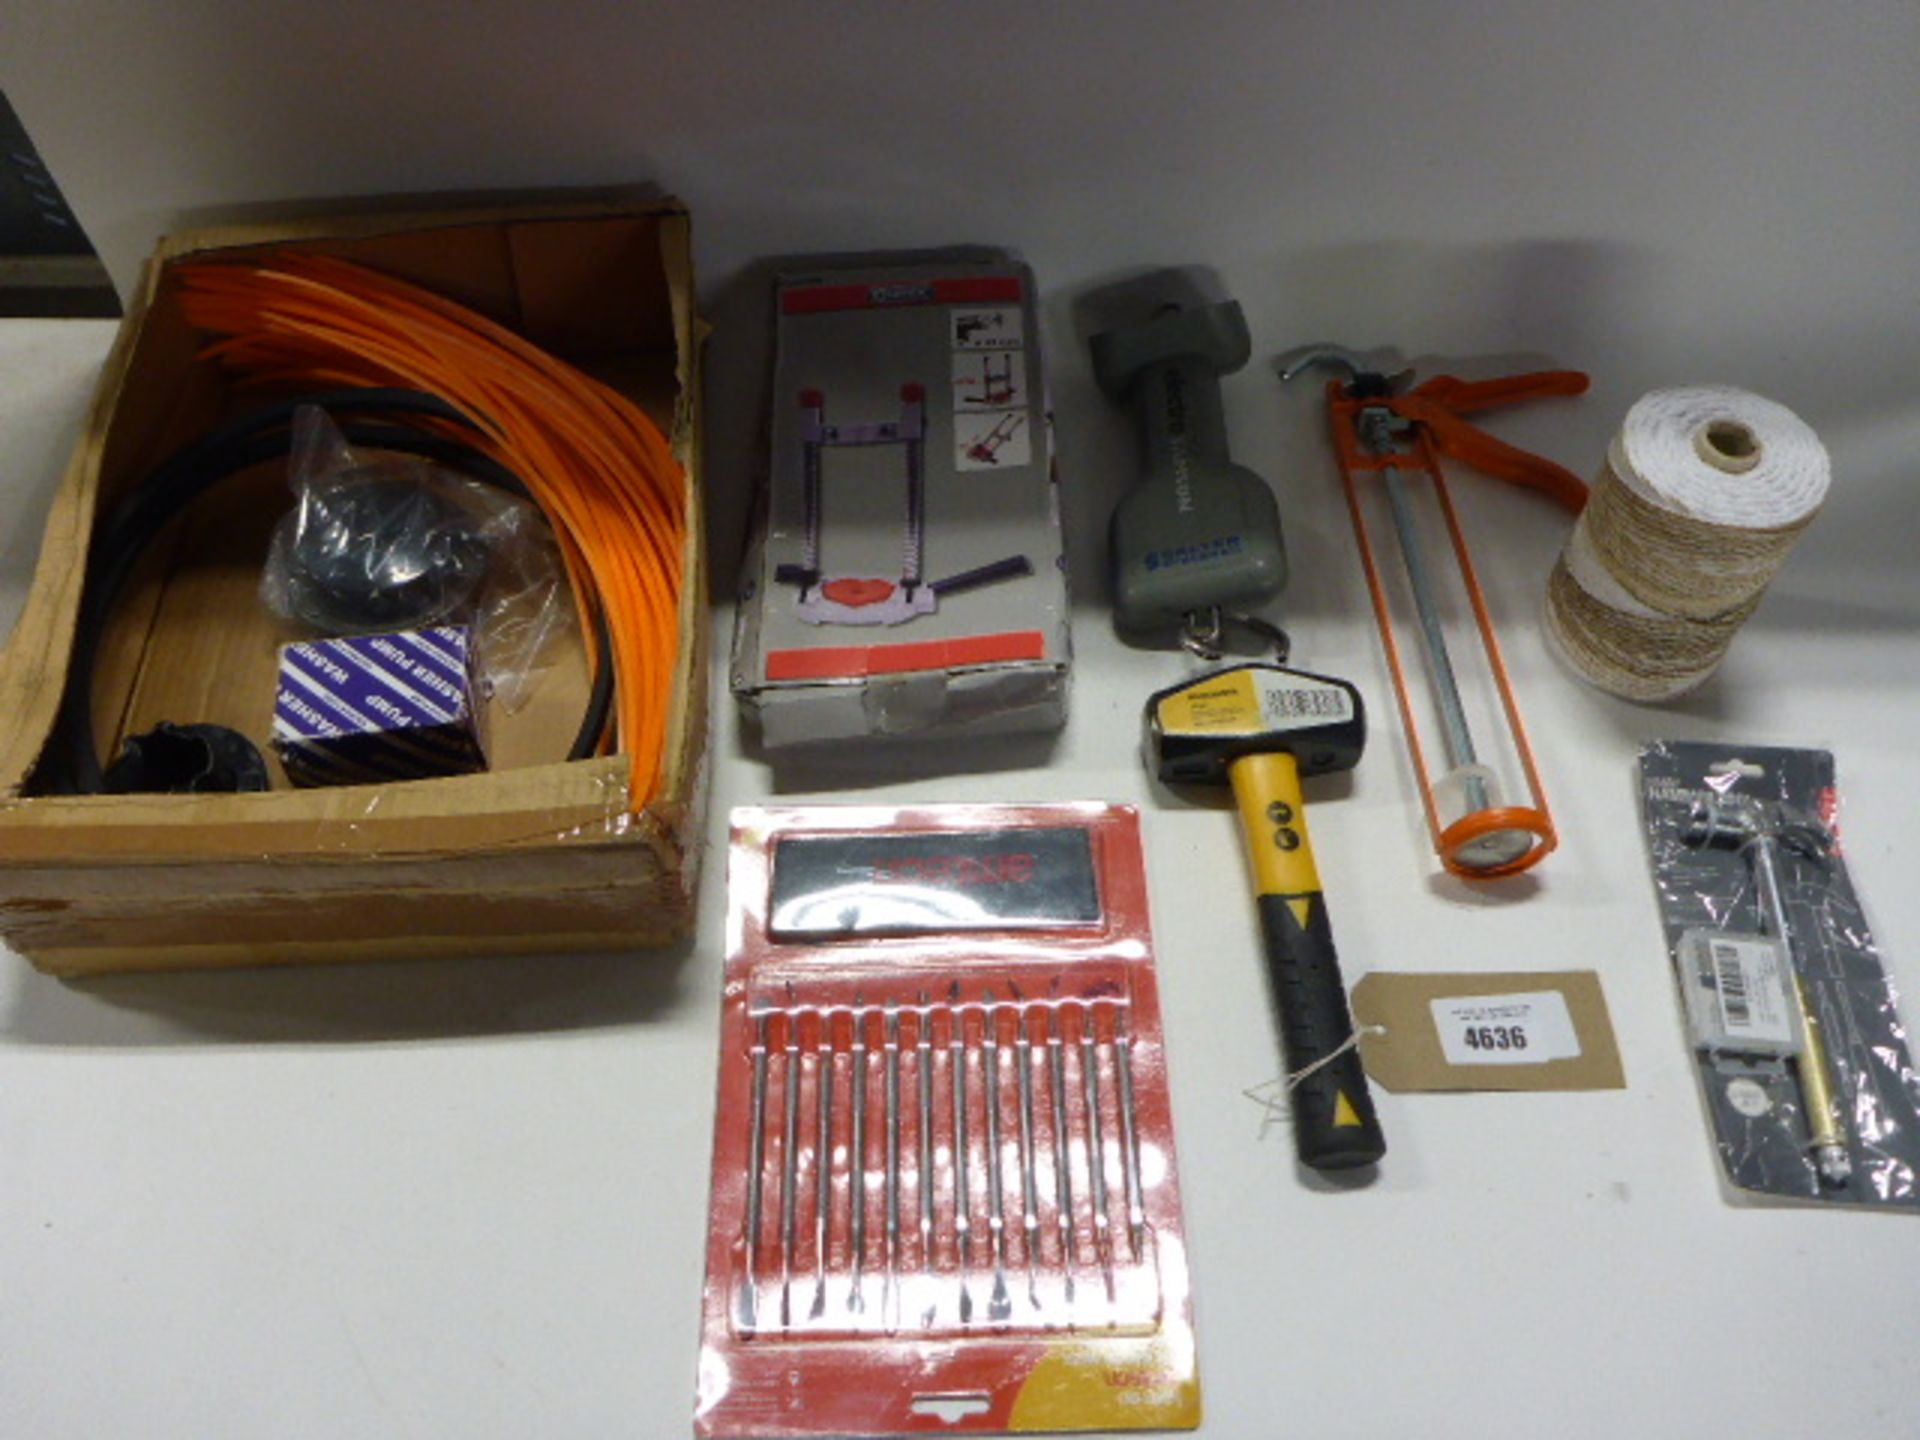 Bag containing strimmer line and heads, drill stands, roughneck hammer, Amtech wax carving set,